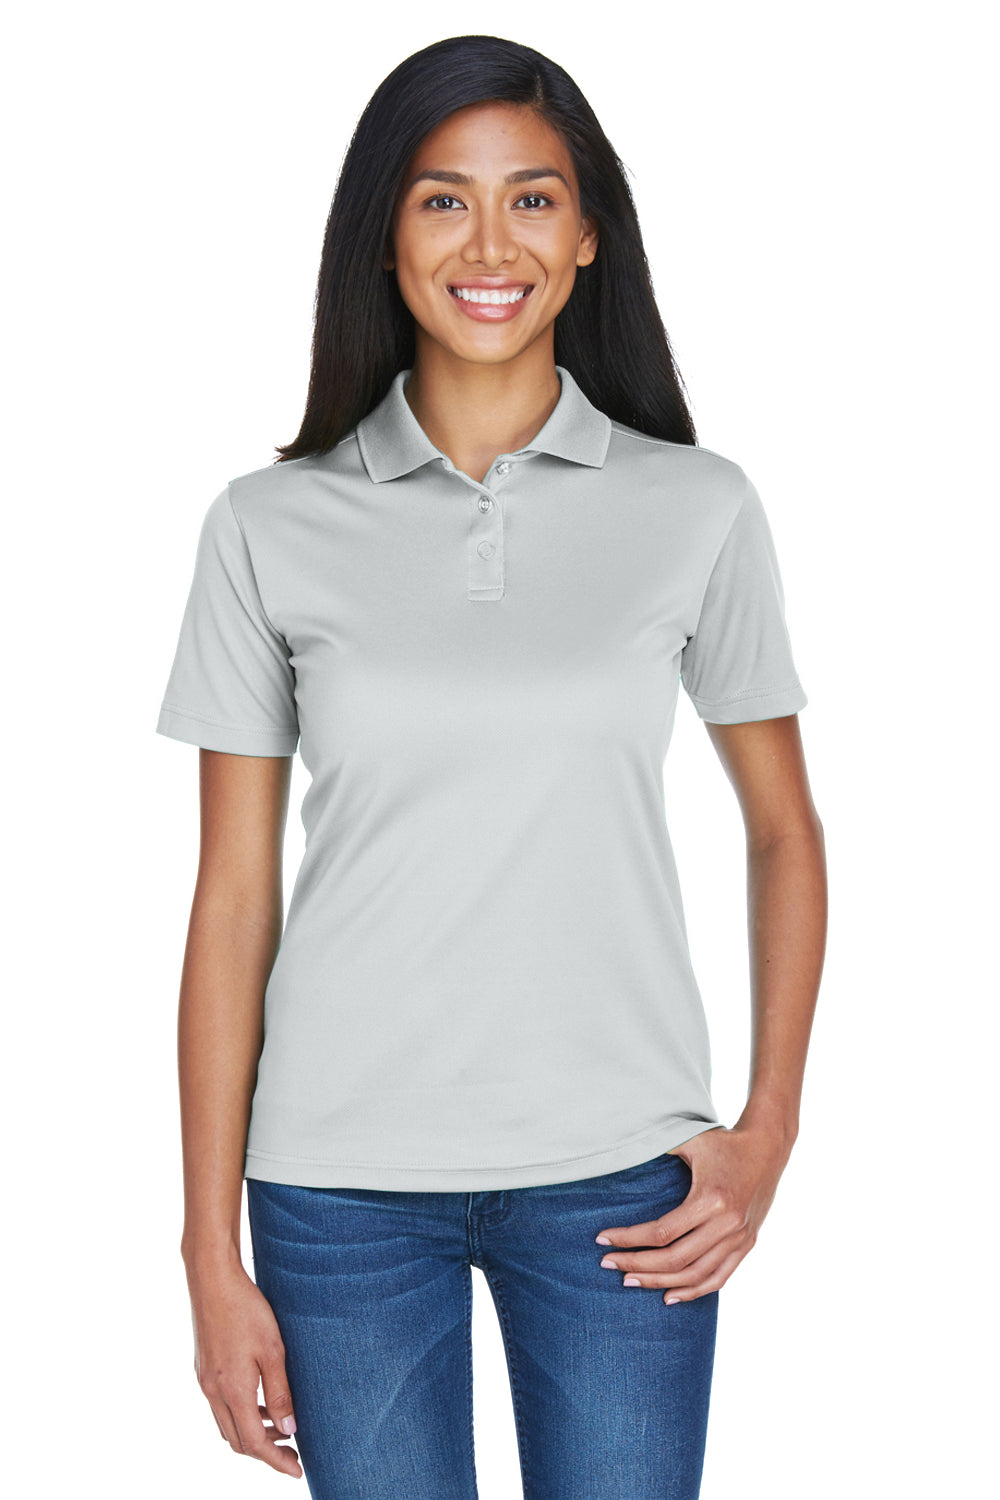 UltraClub 8404 Womens Cool & Dry Moisture Wicking Short Sleeve Polo Shirt Grey Front